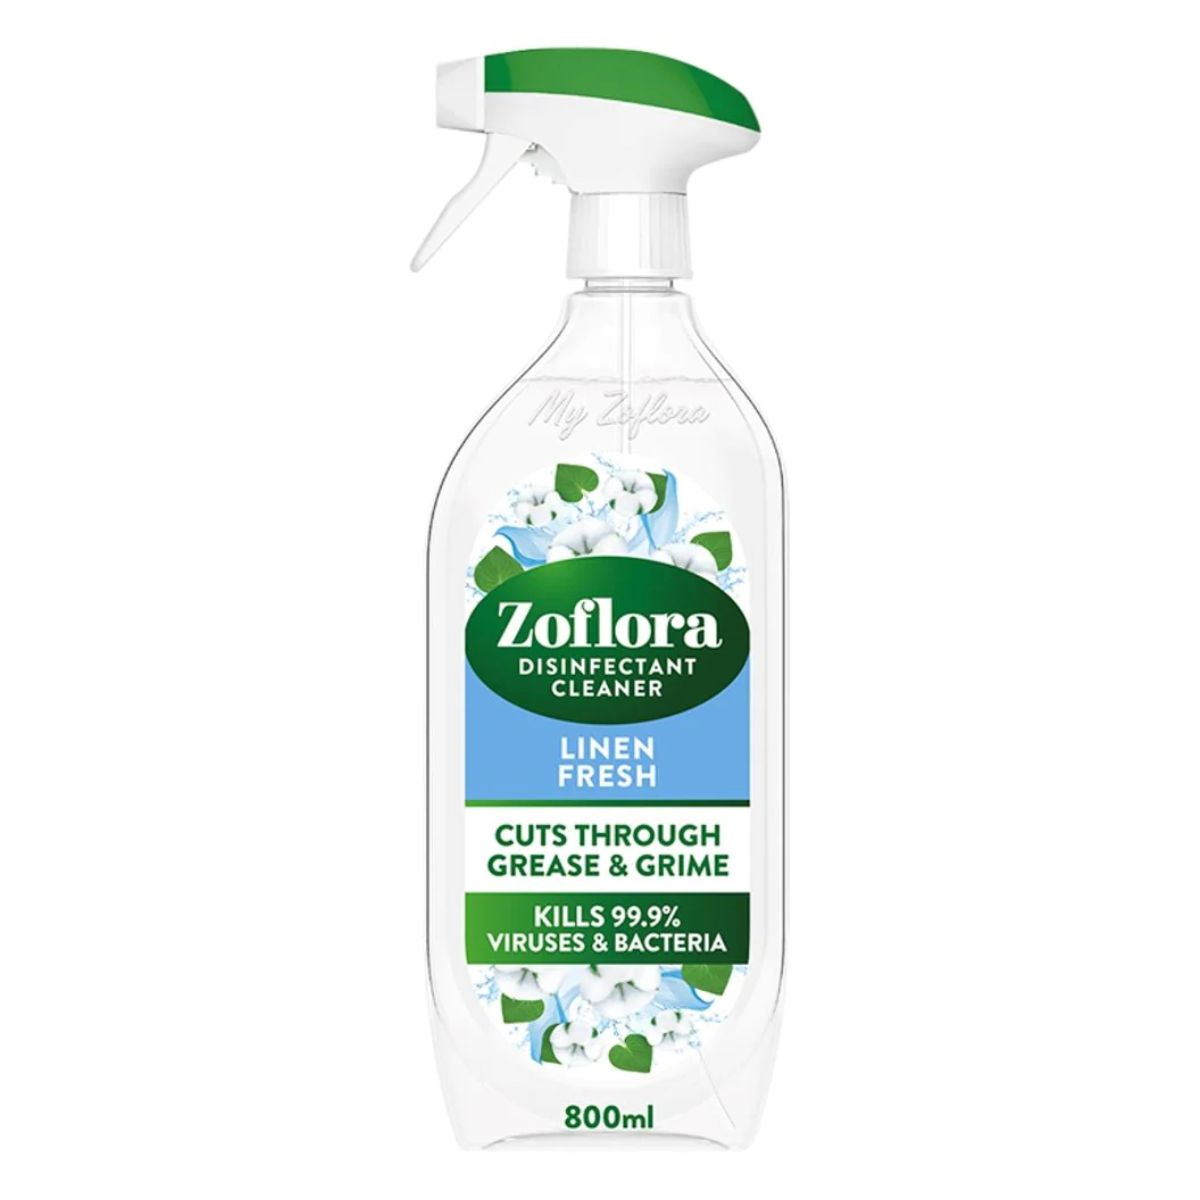 A bottle of Zoflora - Linen Fresh Disinfectant - 800ml cleaning spray on a white background.